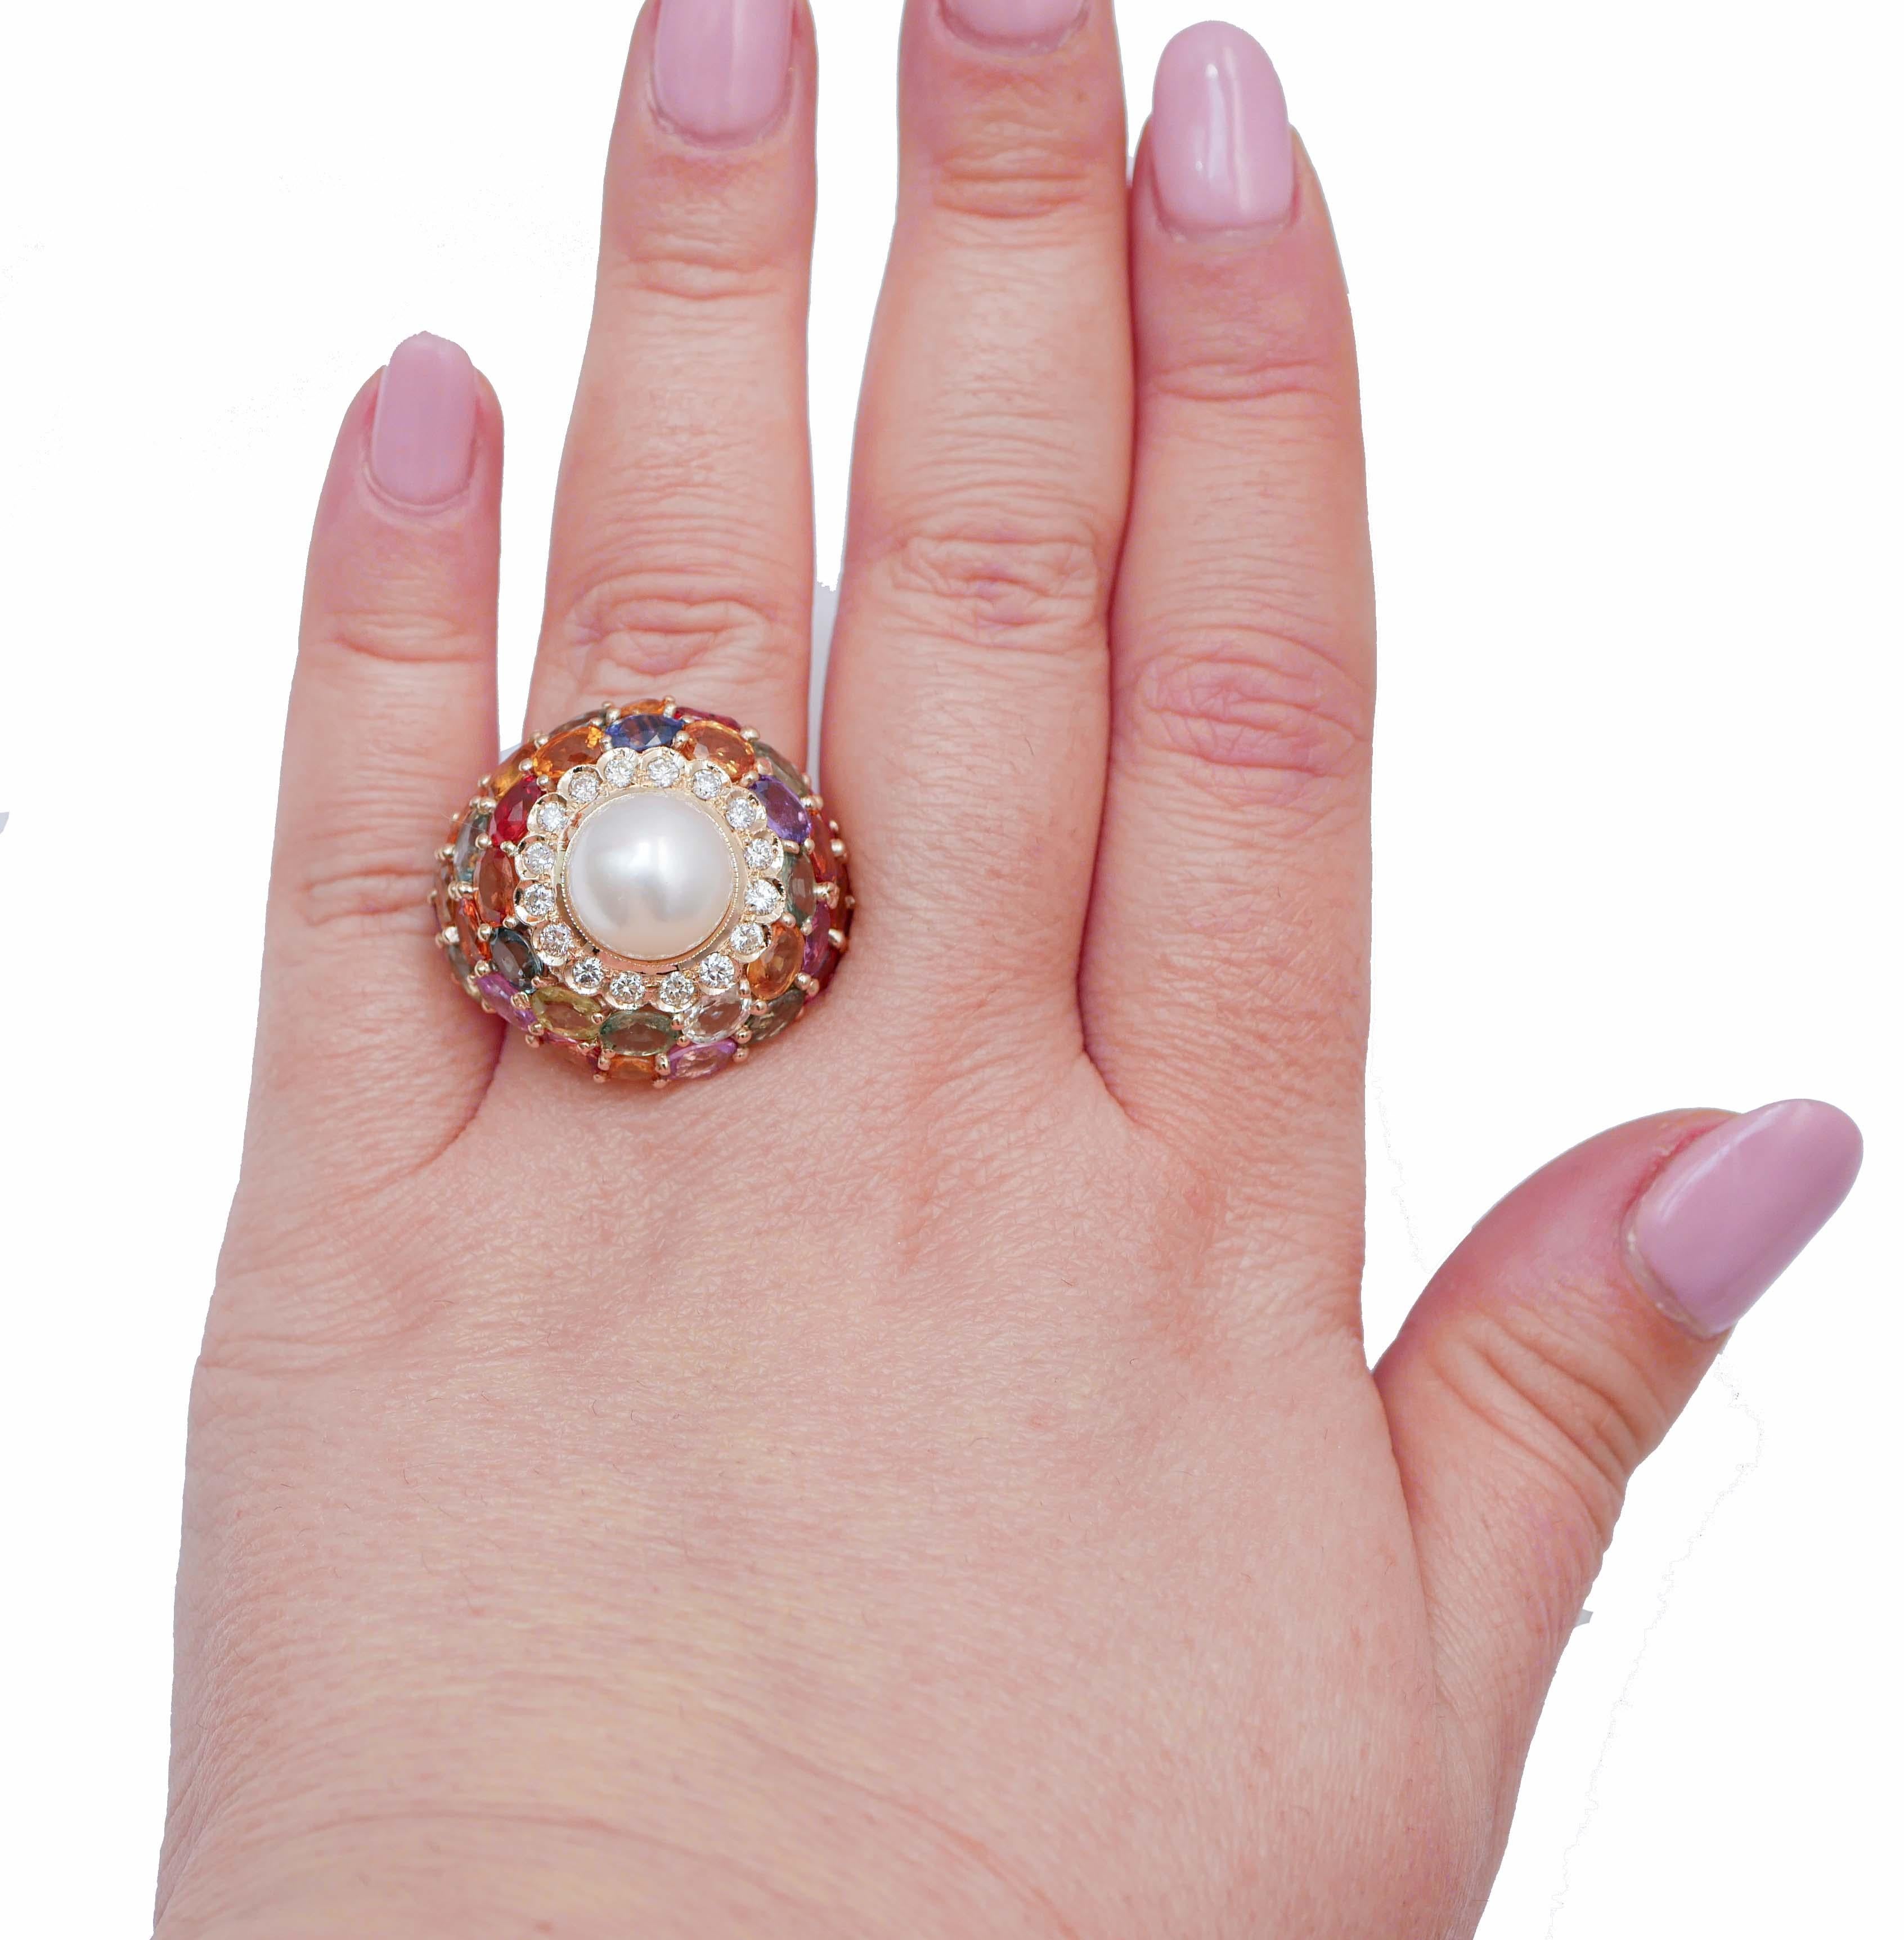 Mixed Cut White Pearl, Multicolor Sapphires, Diamonds, 14 Karat Rose Gold Ring. For Sale